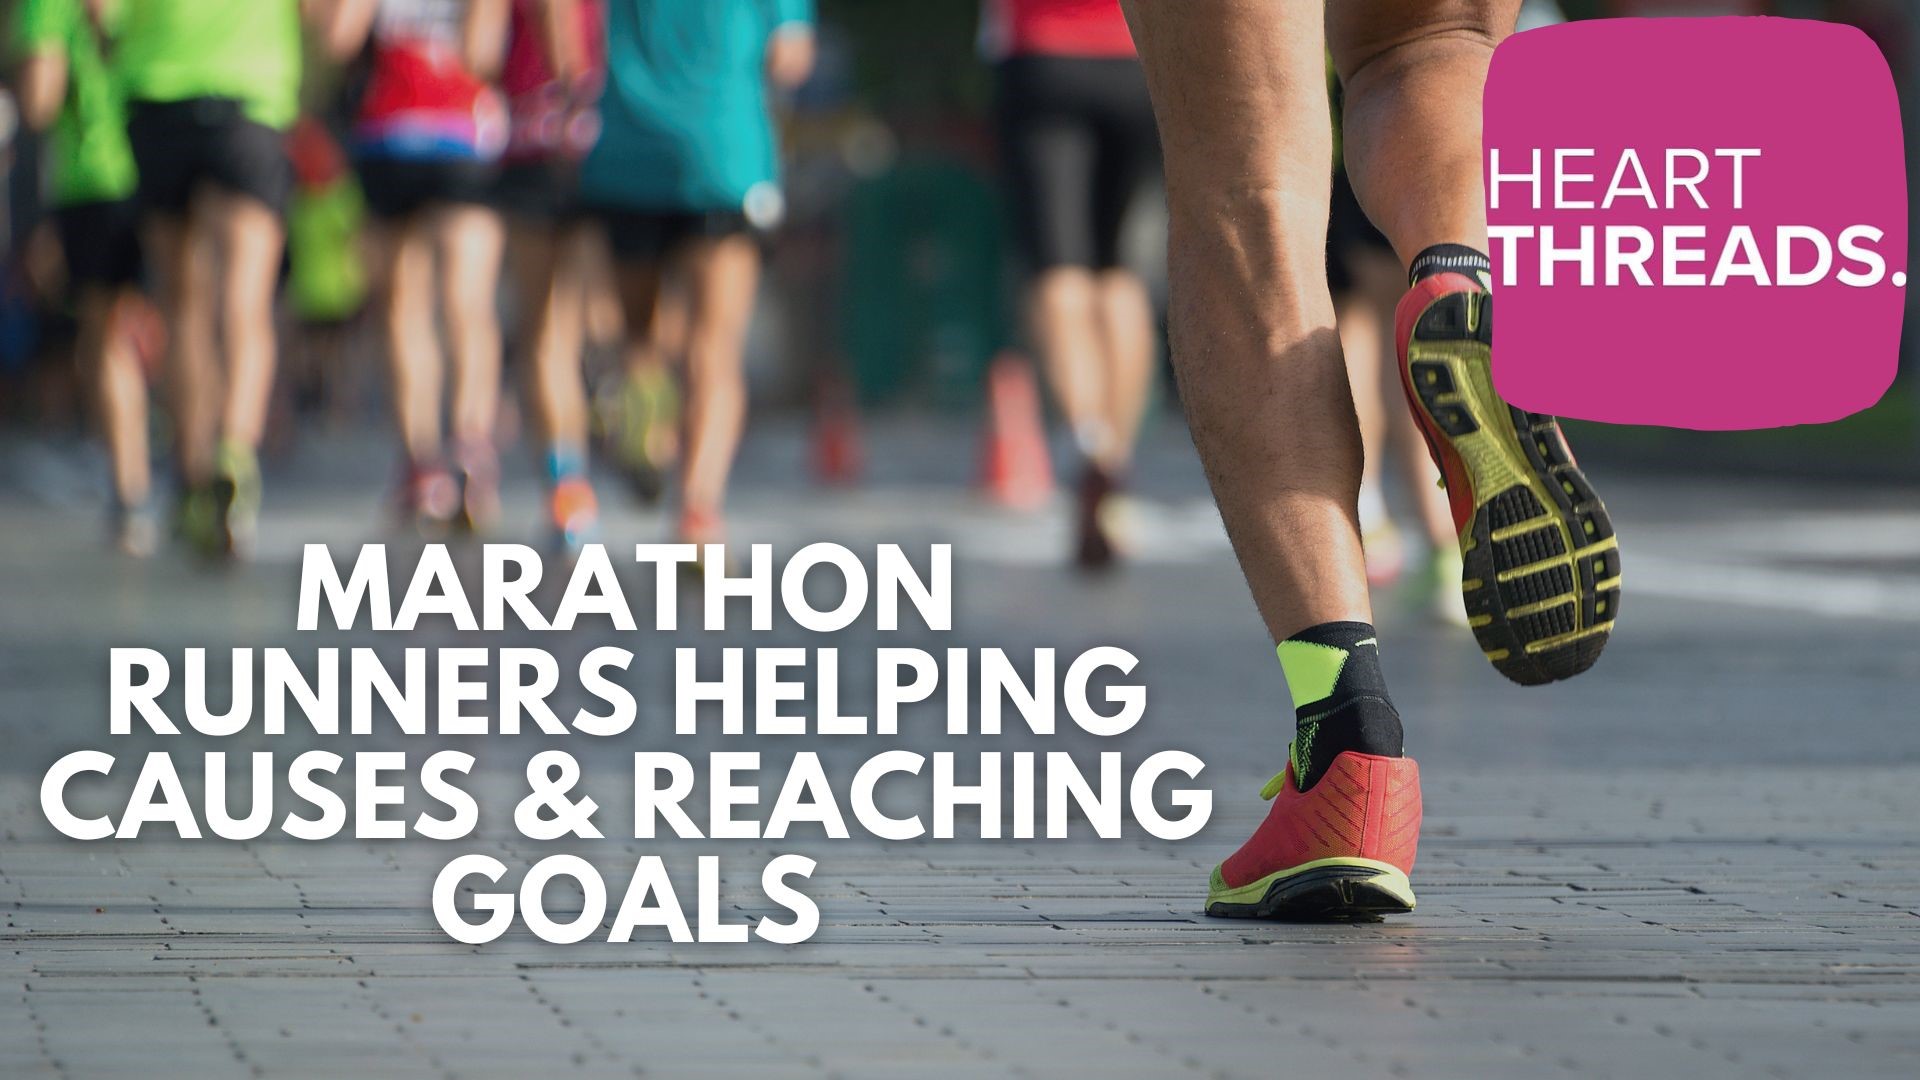 Heartwarming stories of people running marathons to achieve their dreams and to help support causes and other people.